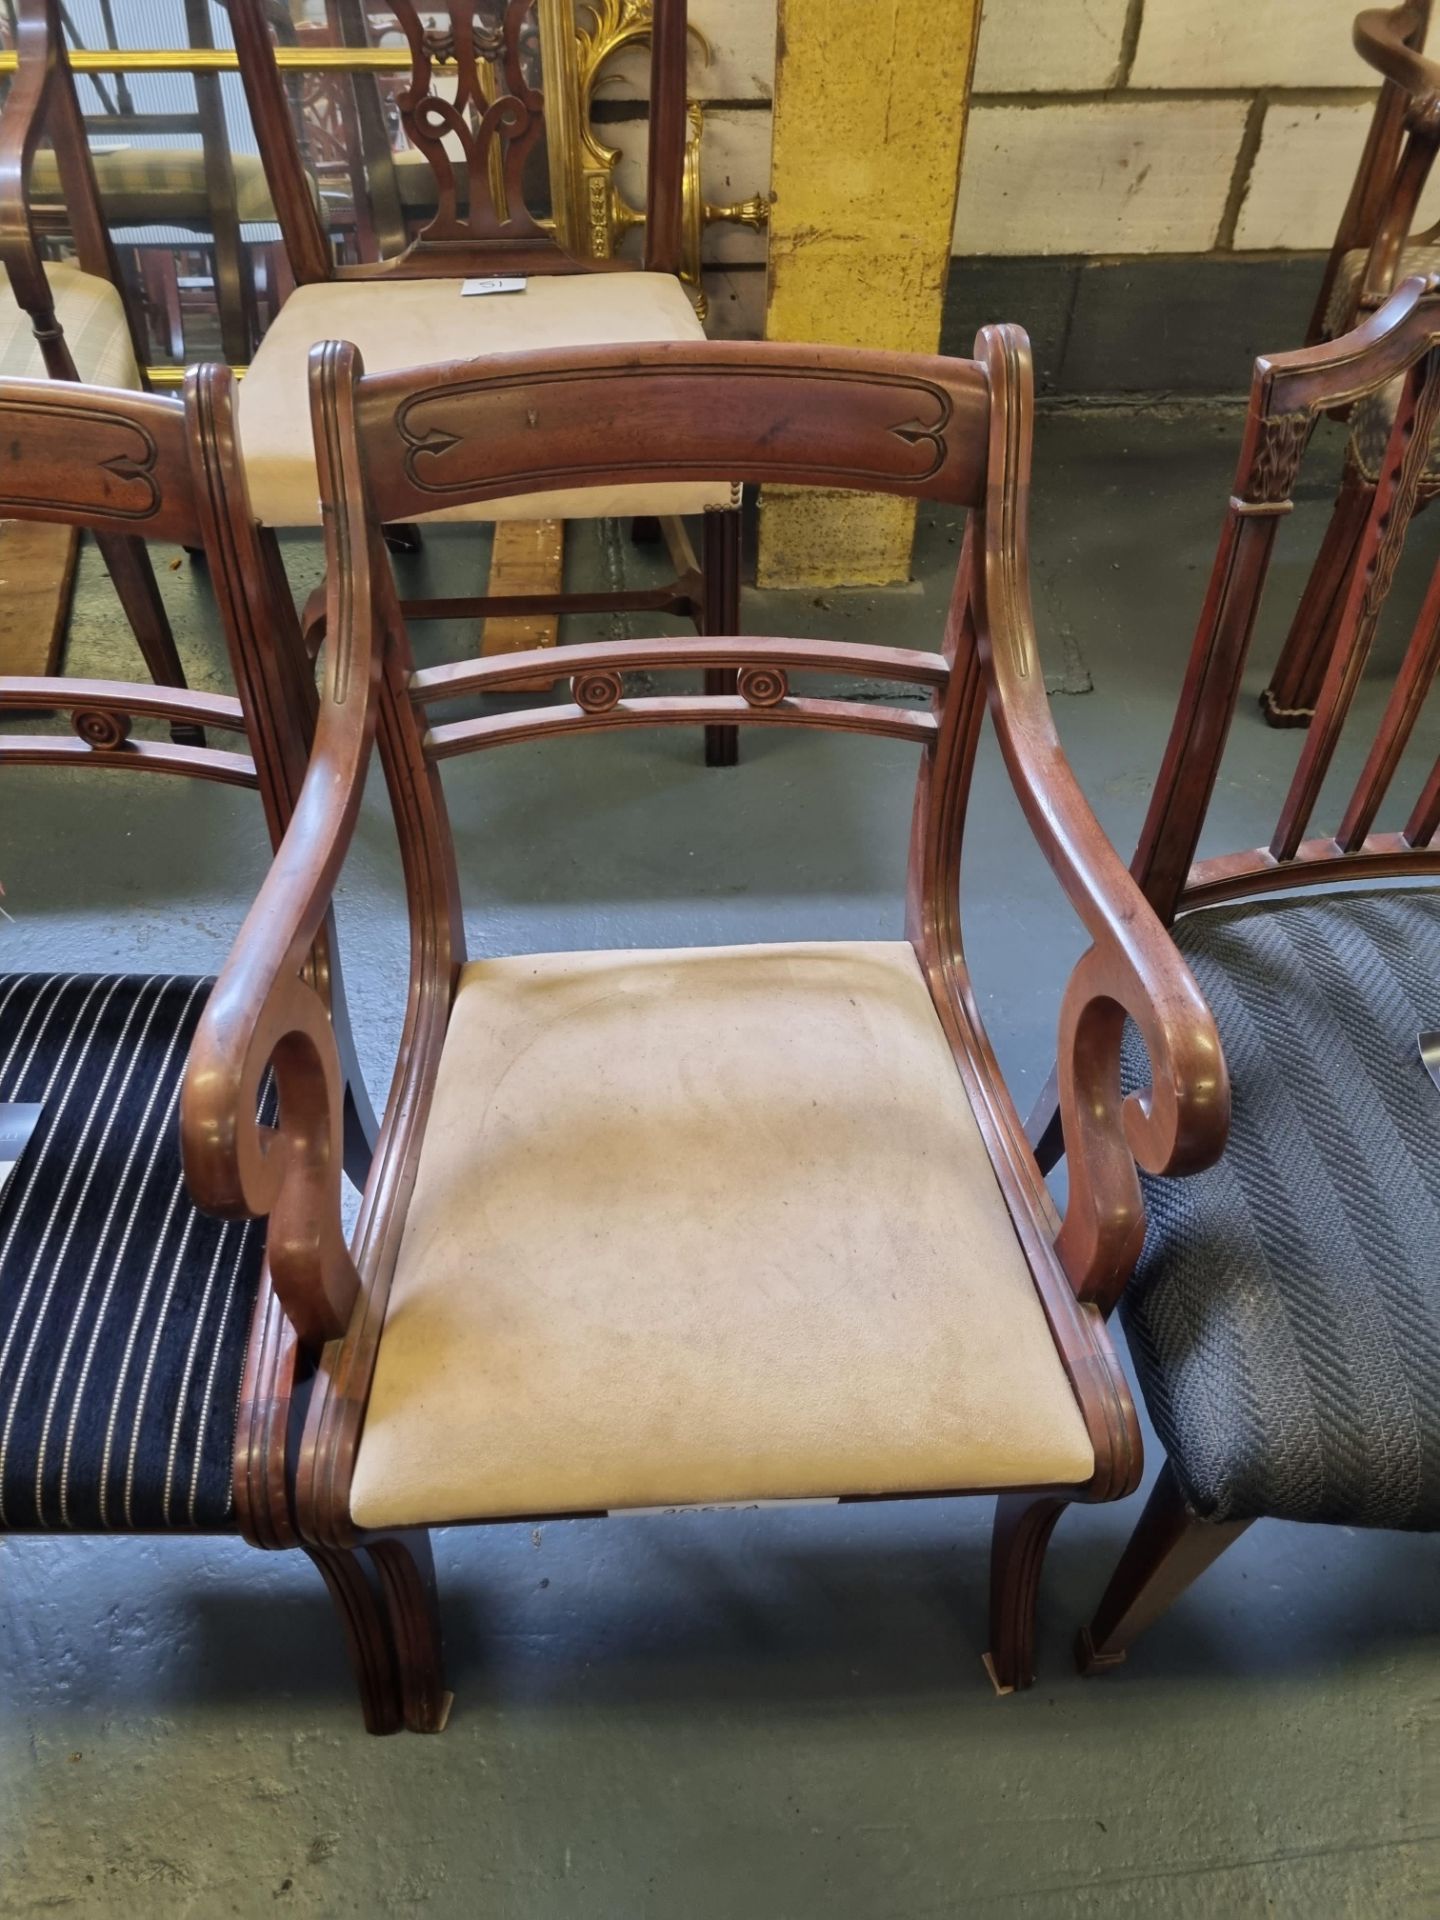 2 X Arthur Brett Regency-Style Mahogany Dining Chairs Upholstered On Sabre Legs With Drop In Seat, - Image 2 of 3